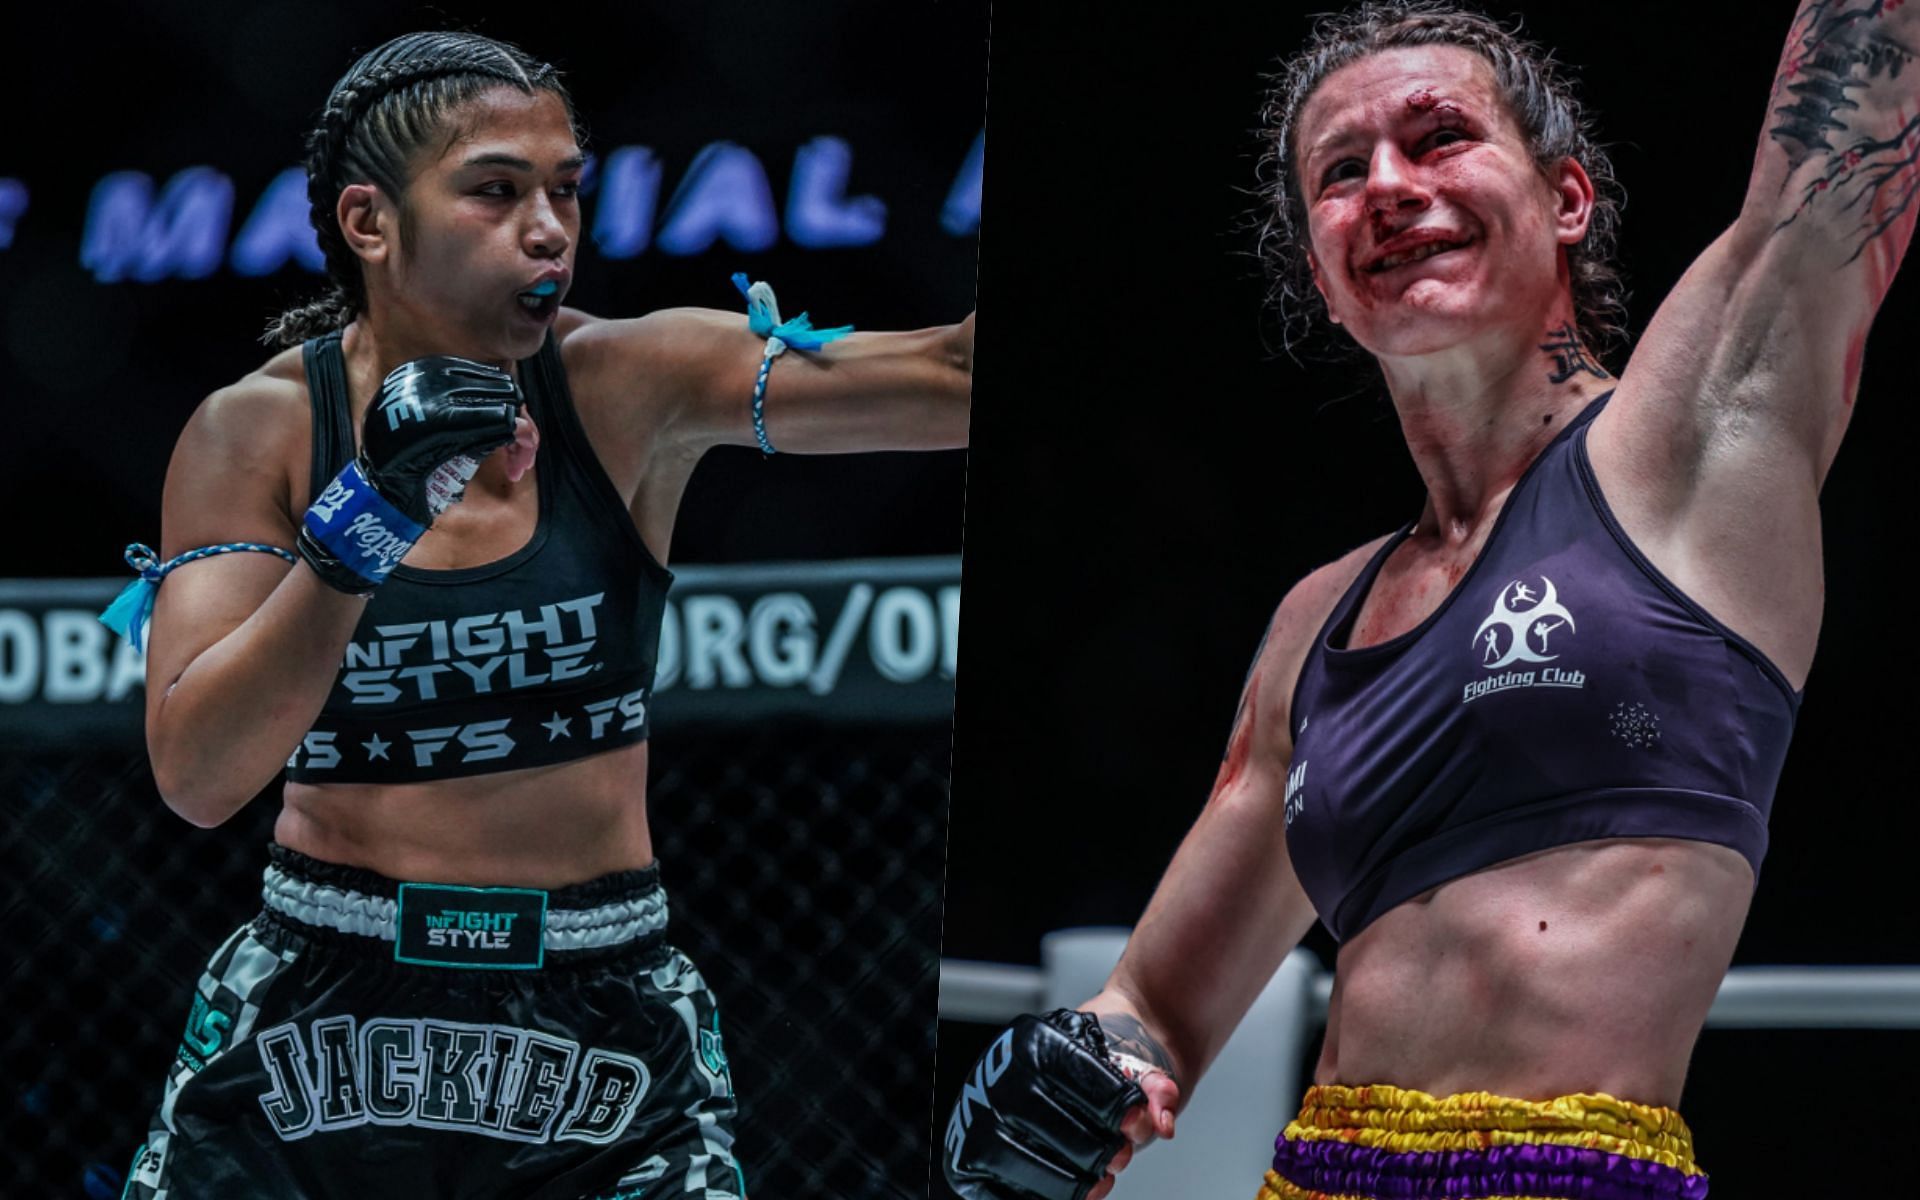 Jackie Buntan (L) and Martine Michieletto (R) | Photo by ONE Championship